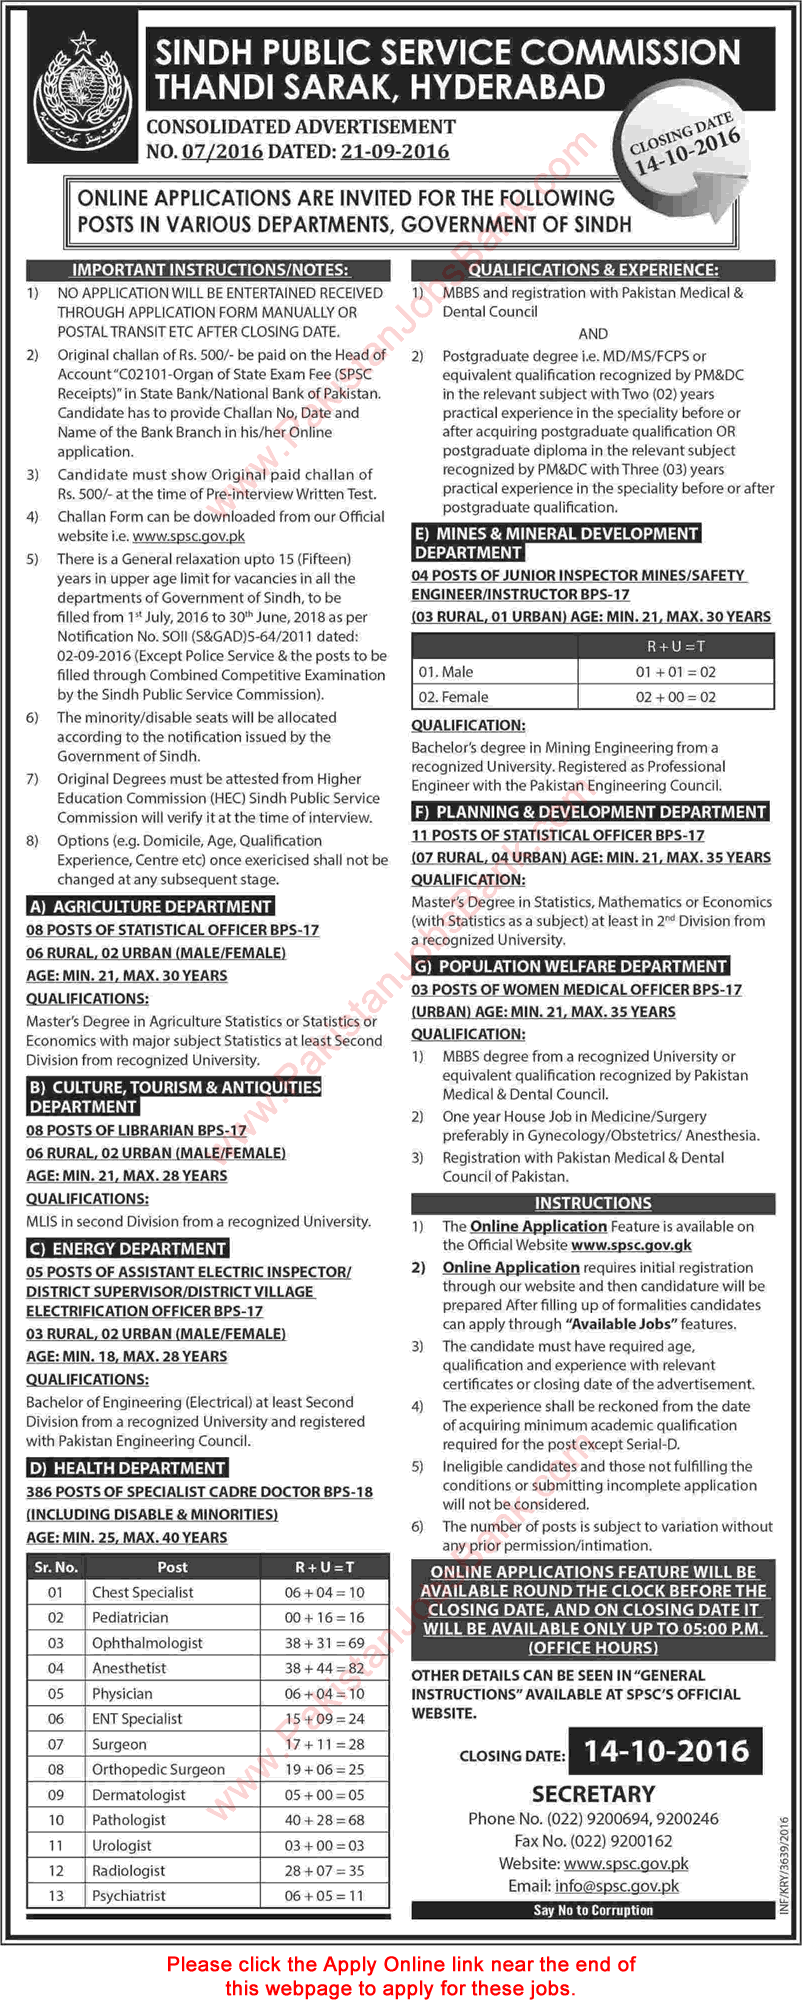 SPSC Jobs September 2016 Apply Online Consolidated Advertisement No. 07/2016 7/2016 Latest